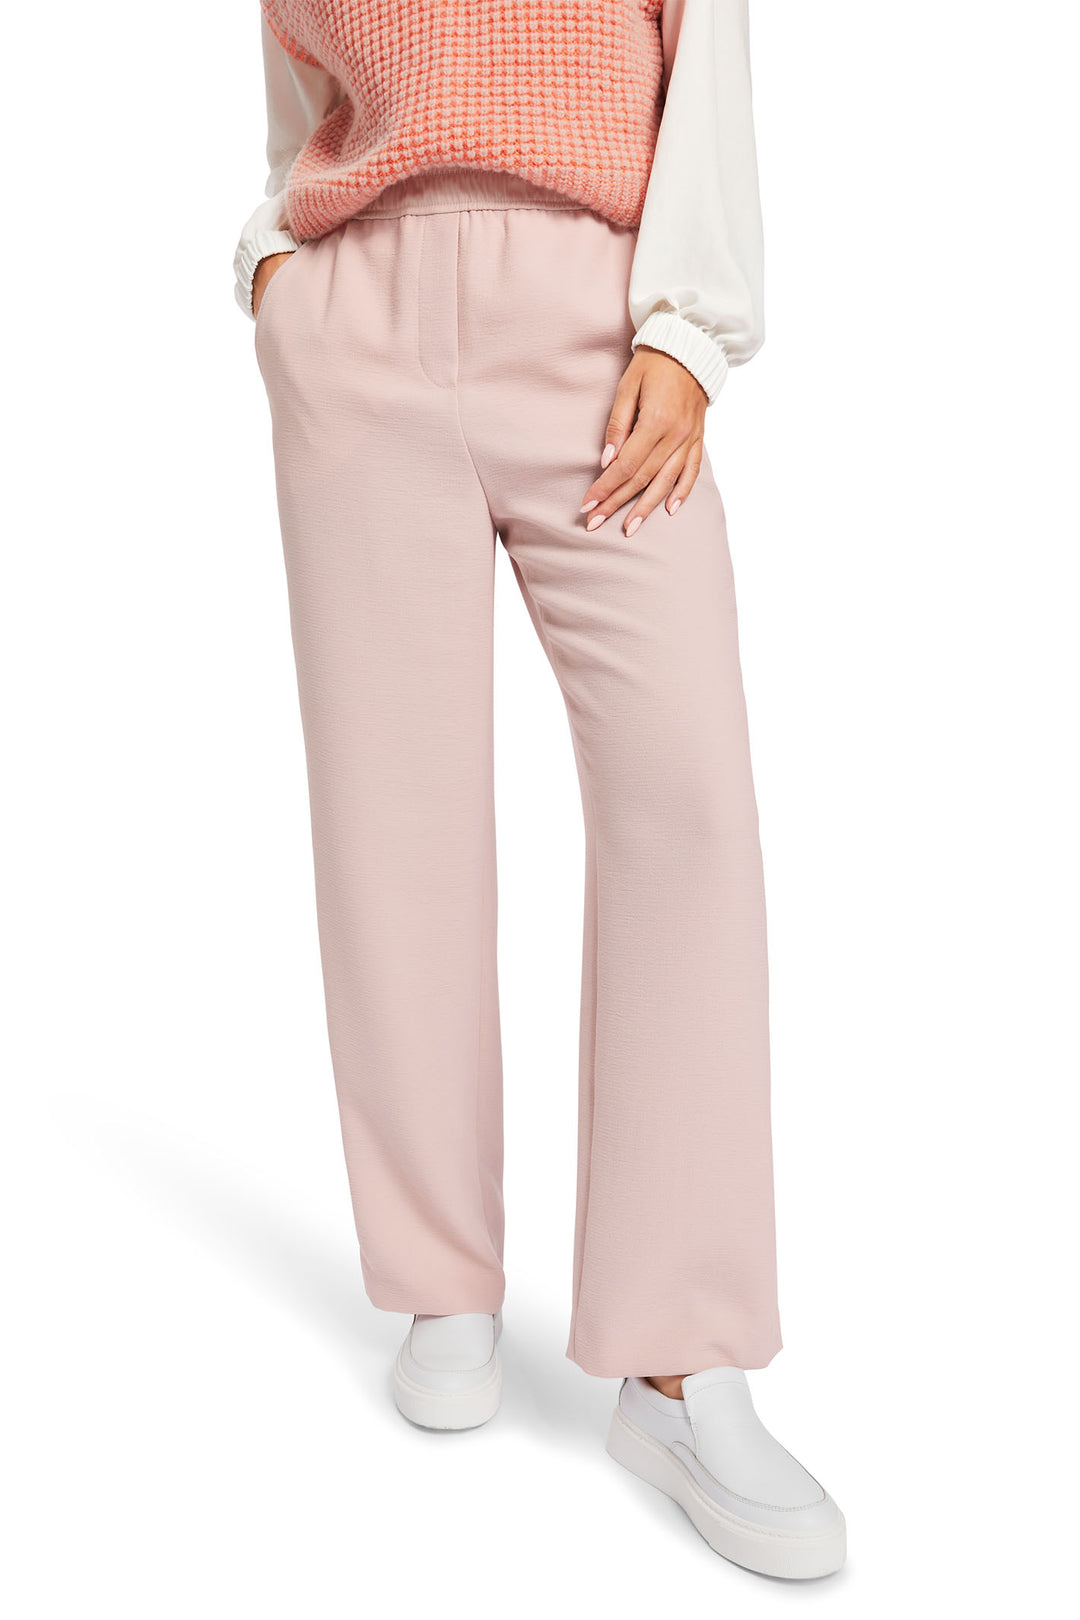 Marc Cain Sports Pull On Trousers Rosewater Pink XS 81.15 W12 168 - Olivia Grace Fashion